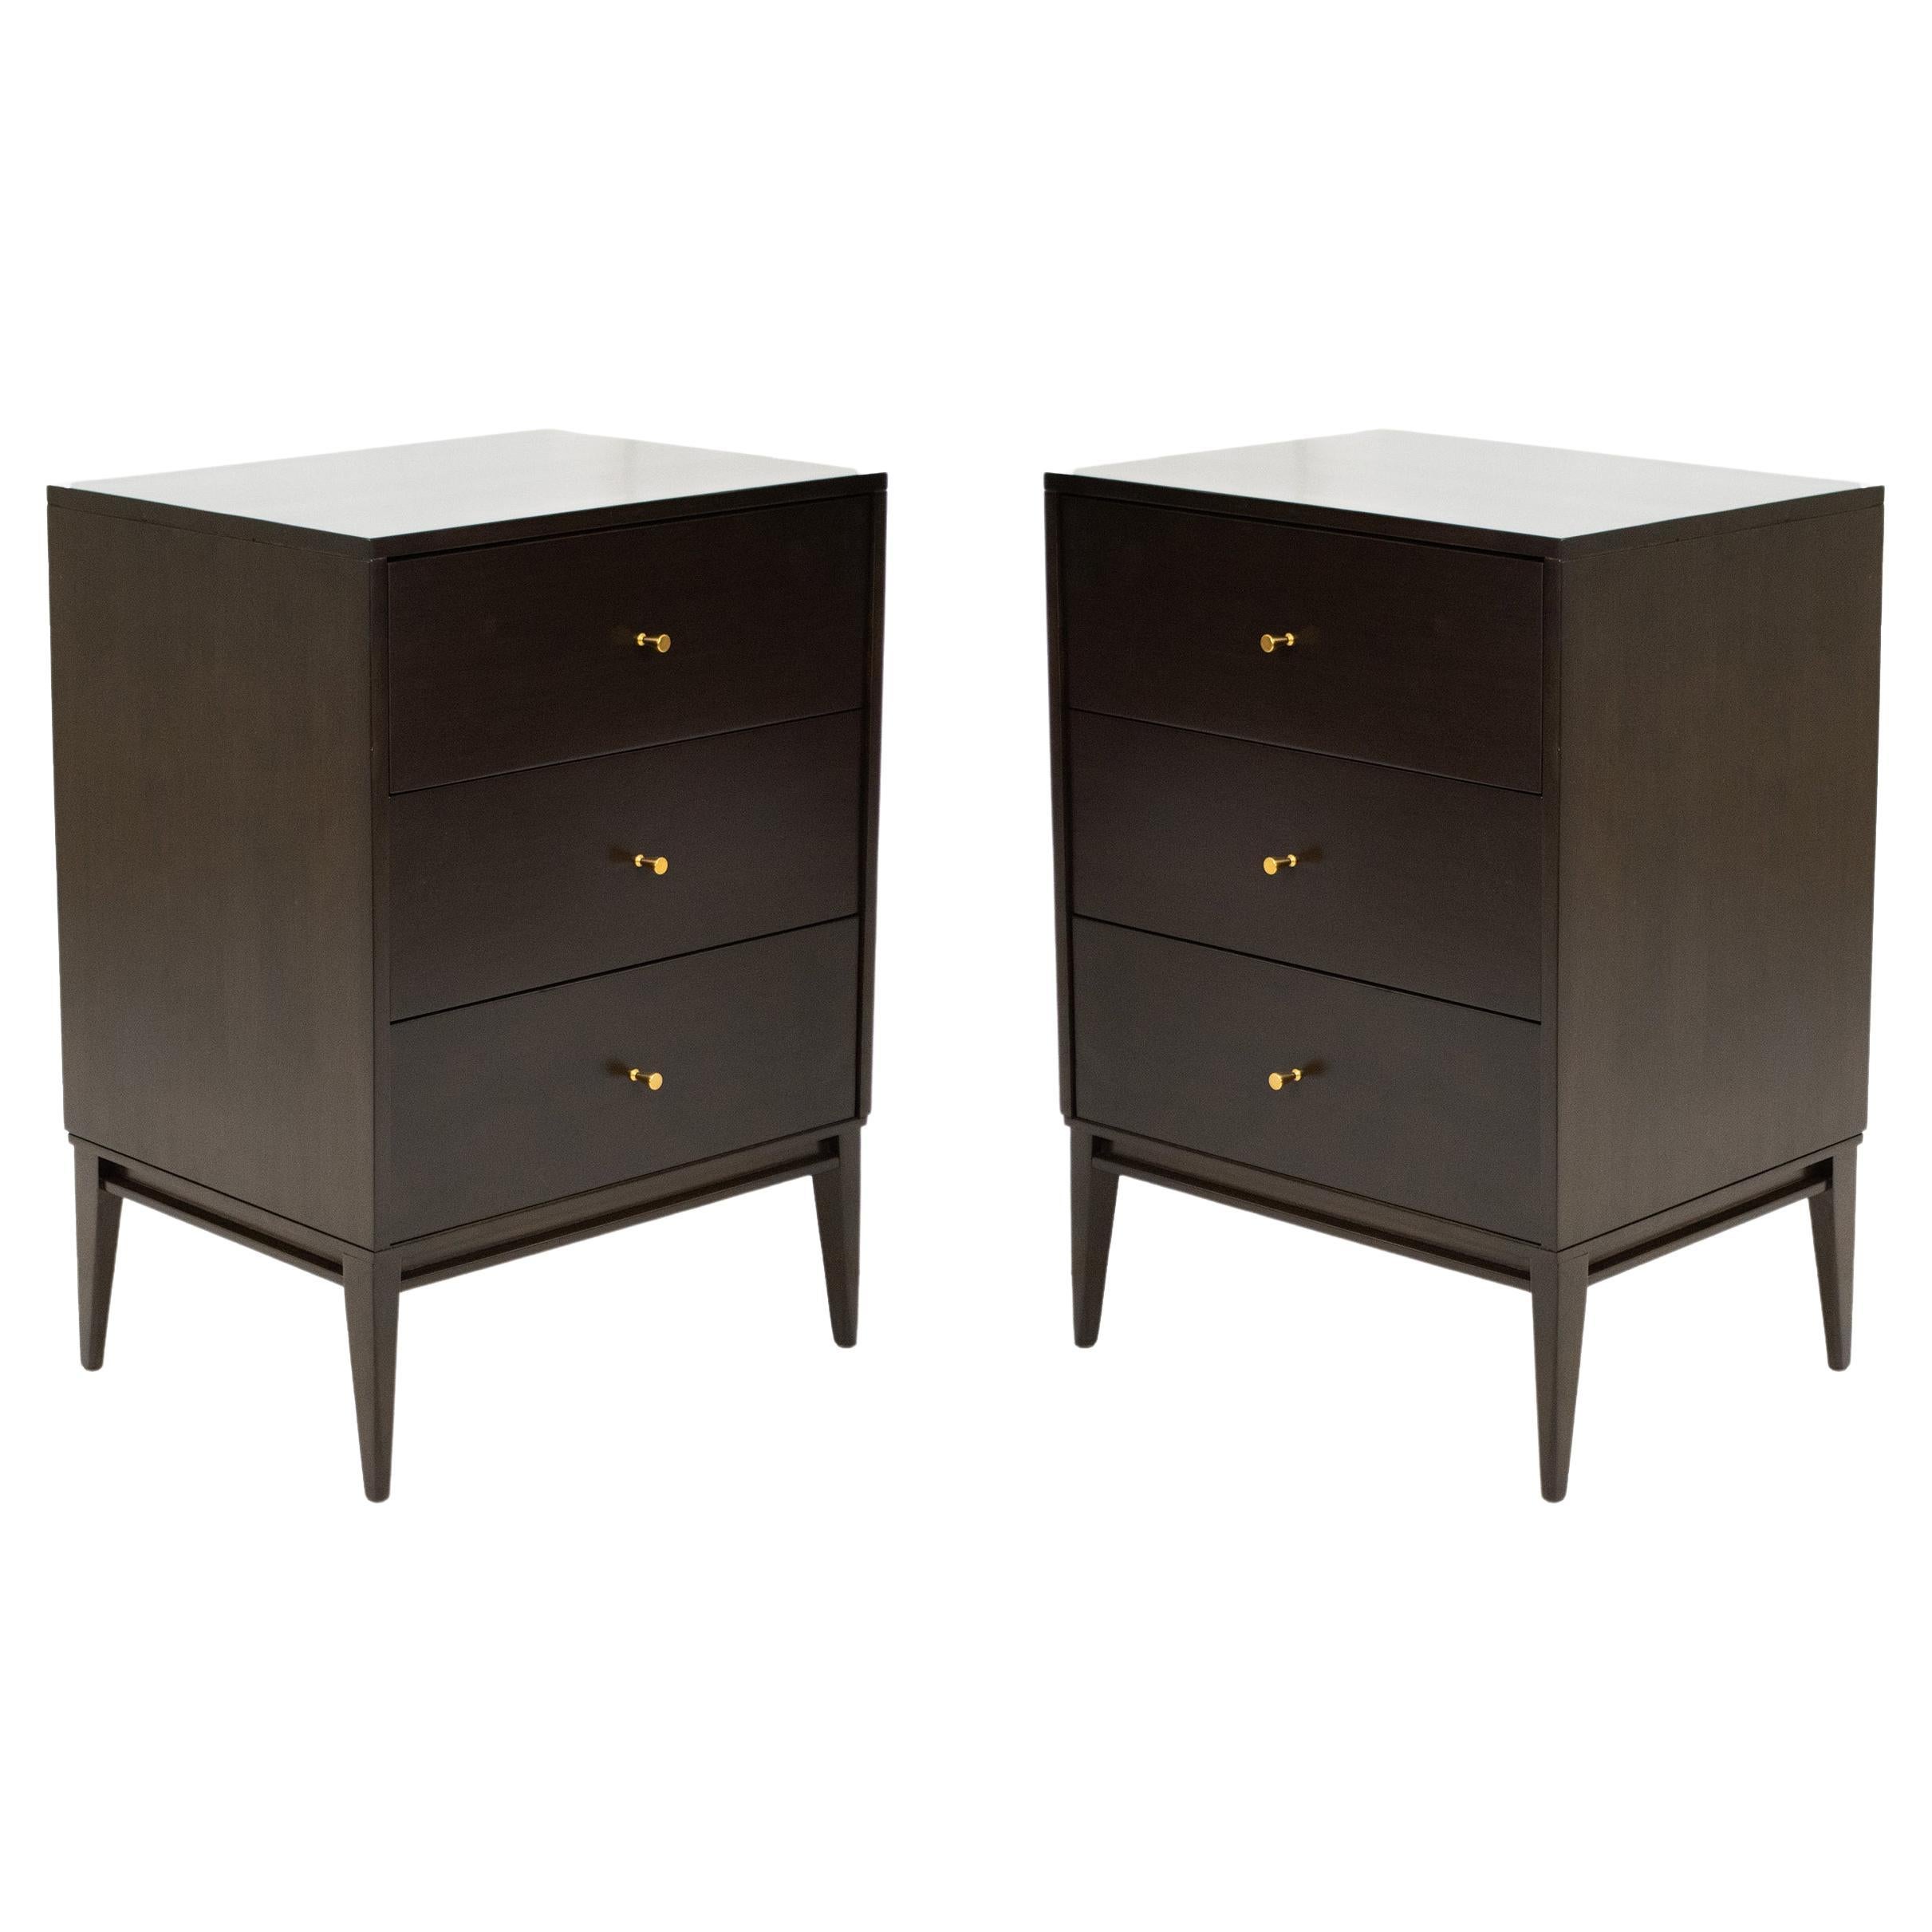 Pair of Paul McCobb Planner Group Three-Drawer Tall Night Stands